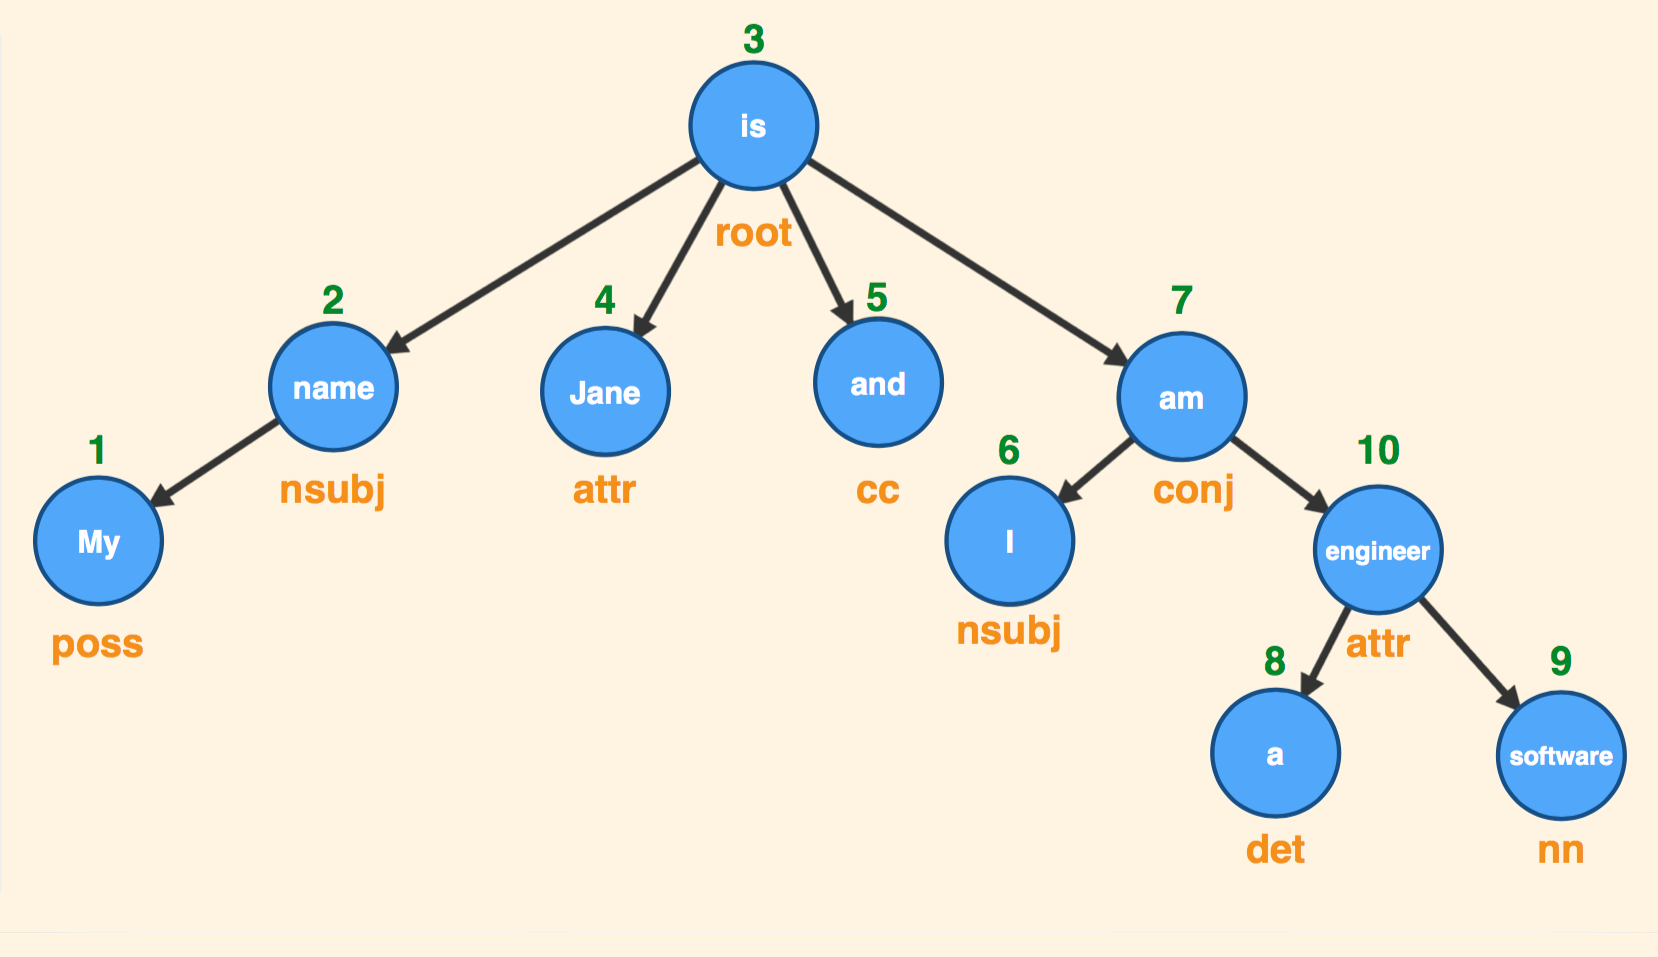 Defining relationships with Dependency Grammar 